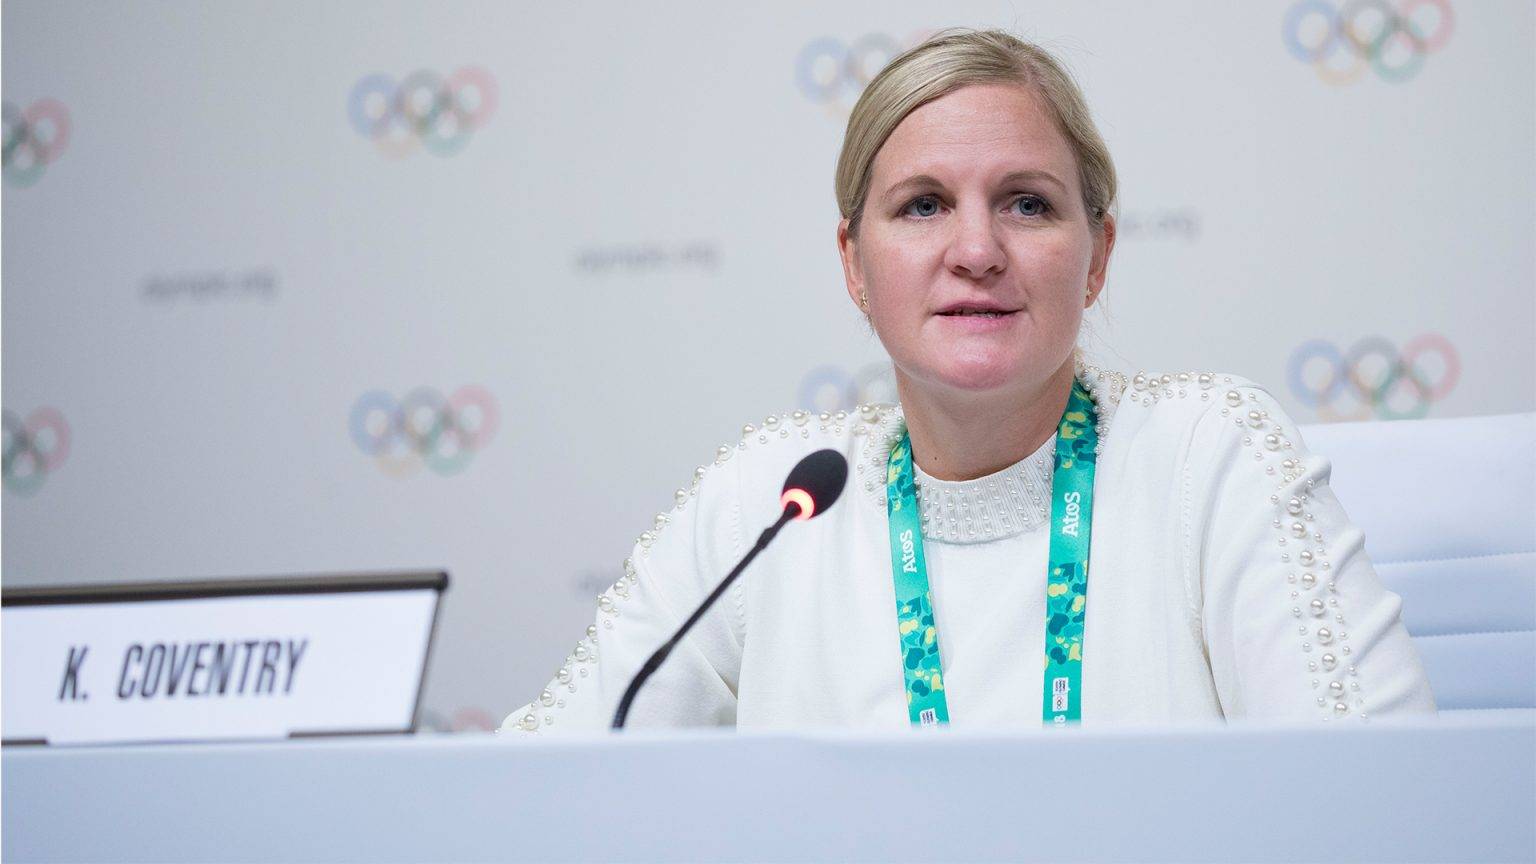 KirstyCoventry